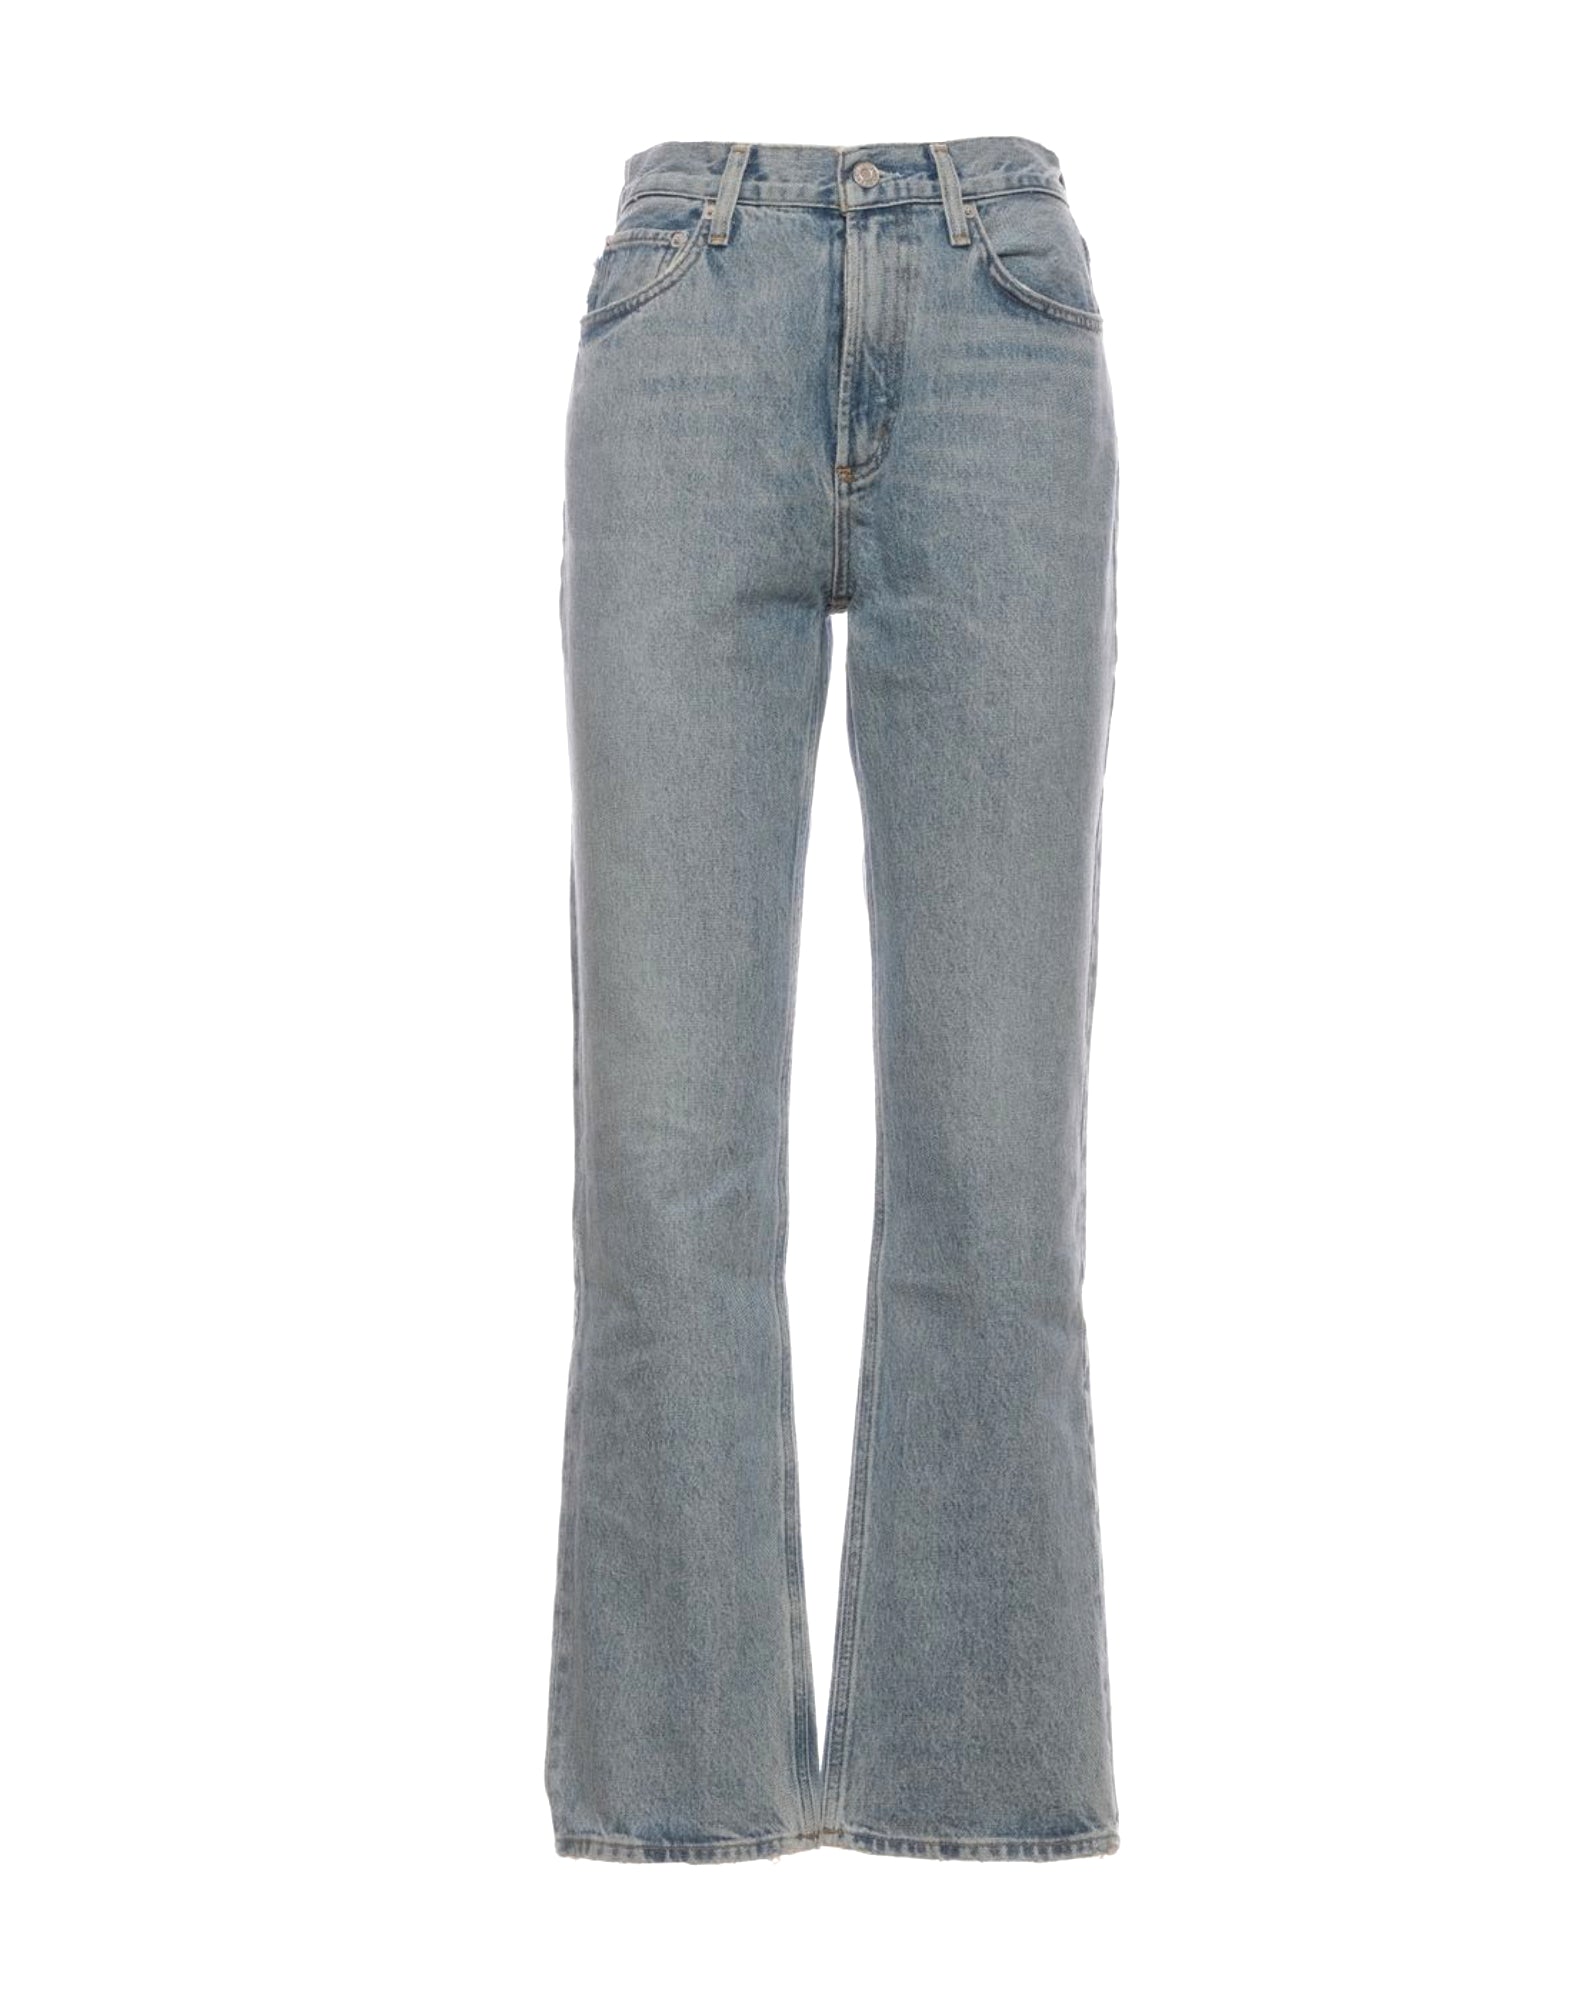 Jeans Woman A9075 1206 Sway Agolde